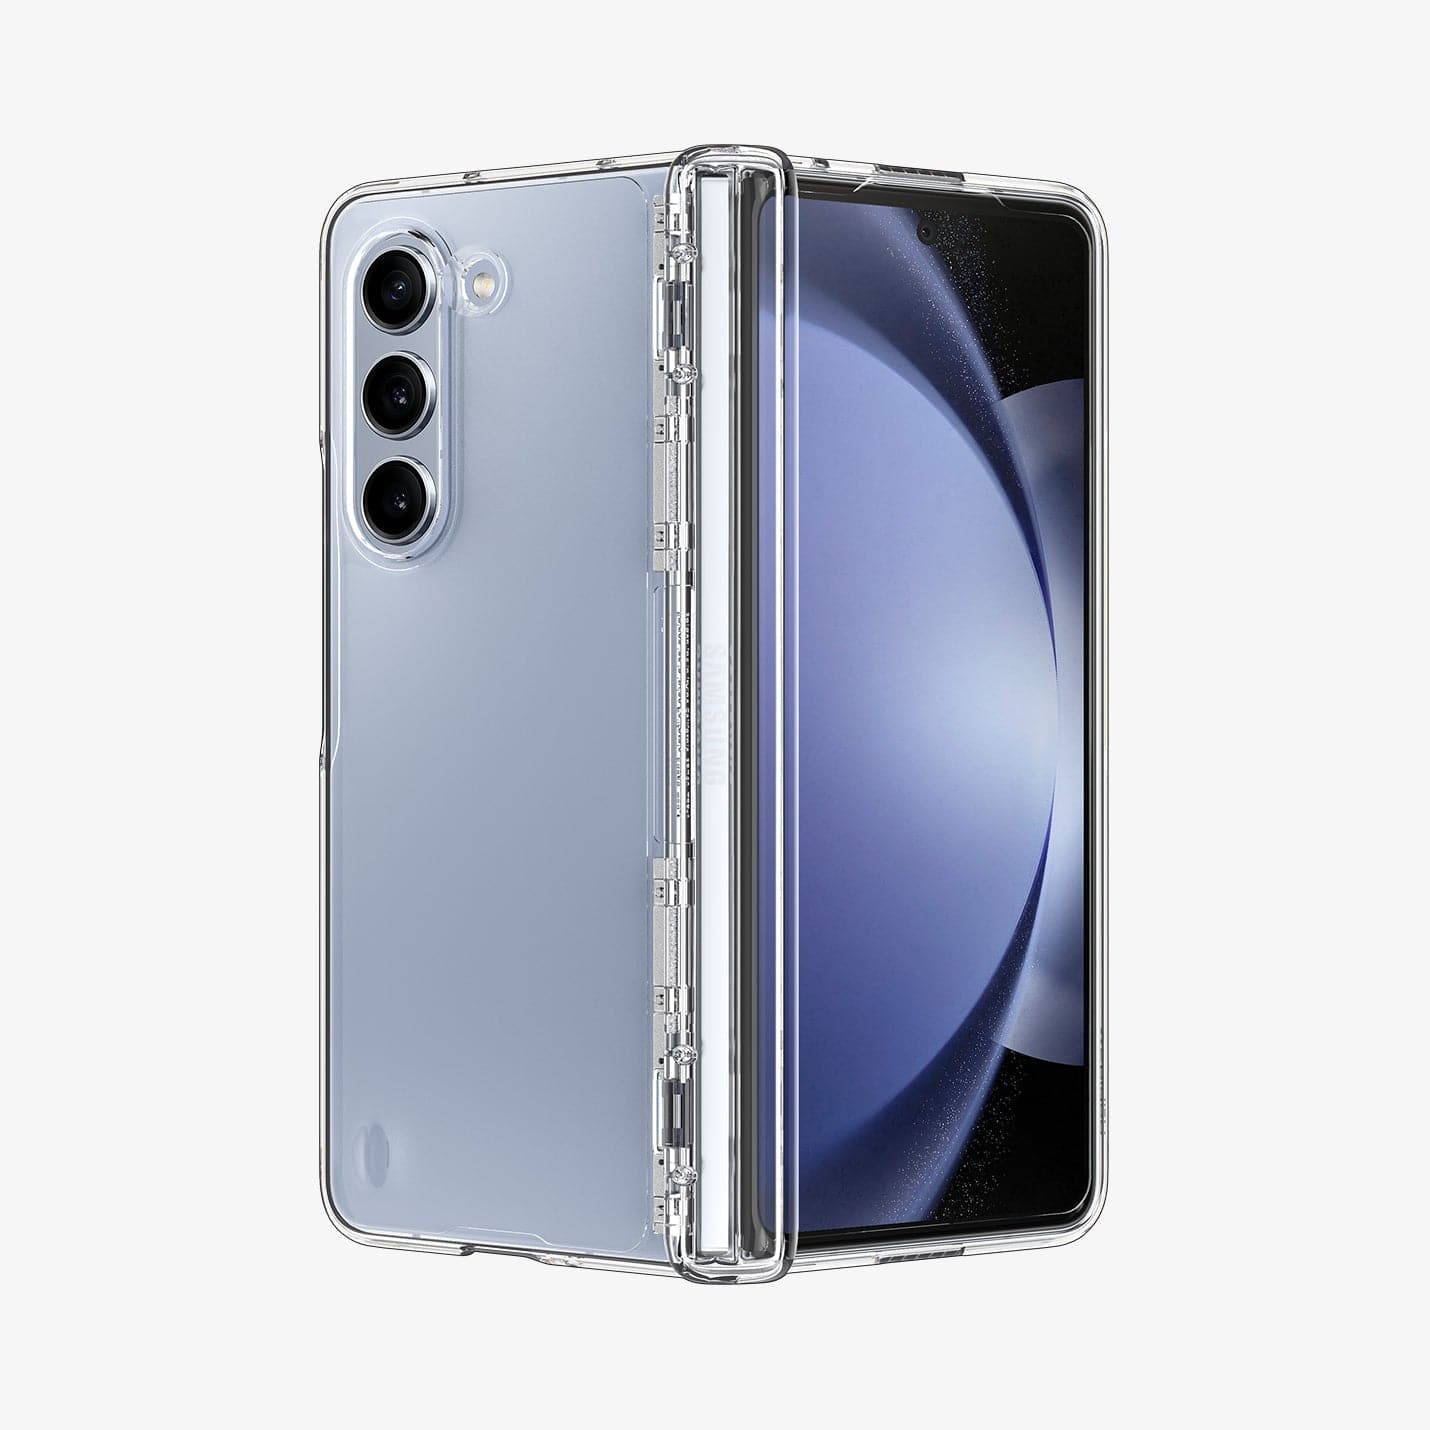 ACS06516 - Galaxy Z Fold 5 Case Thin Fit Pro in crystal clear showing the back, hinge and front